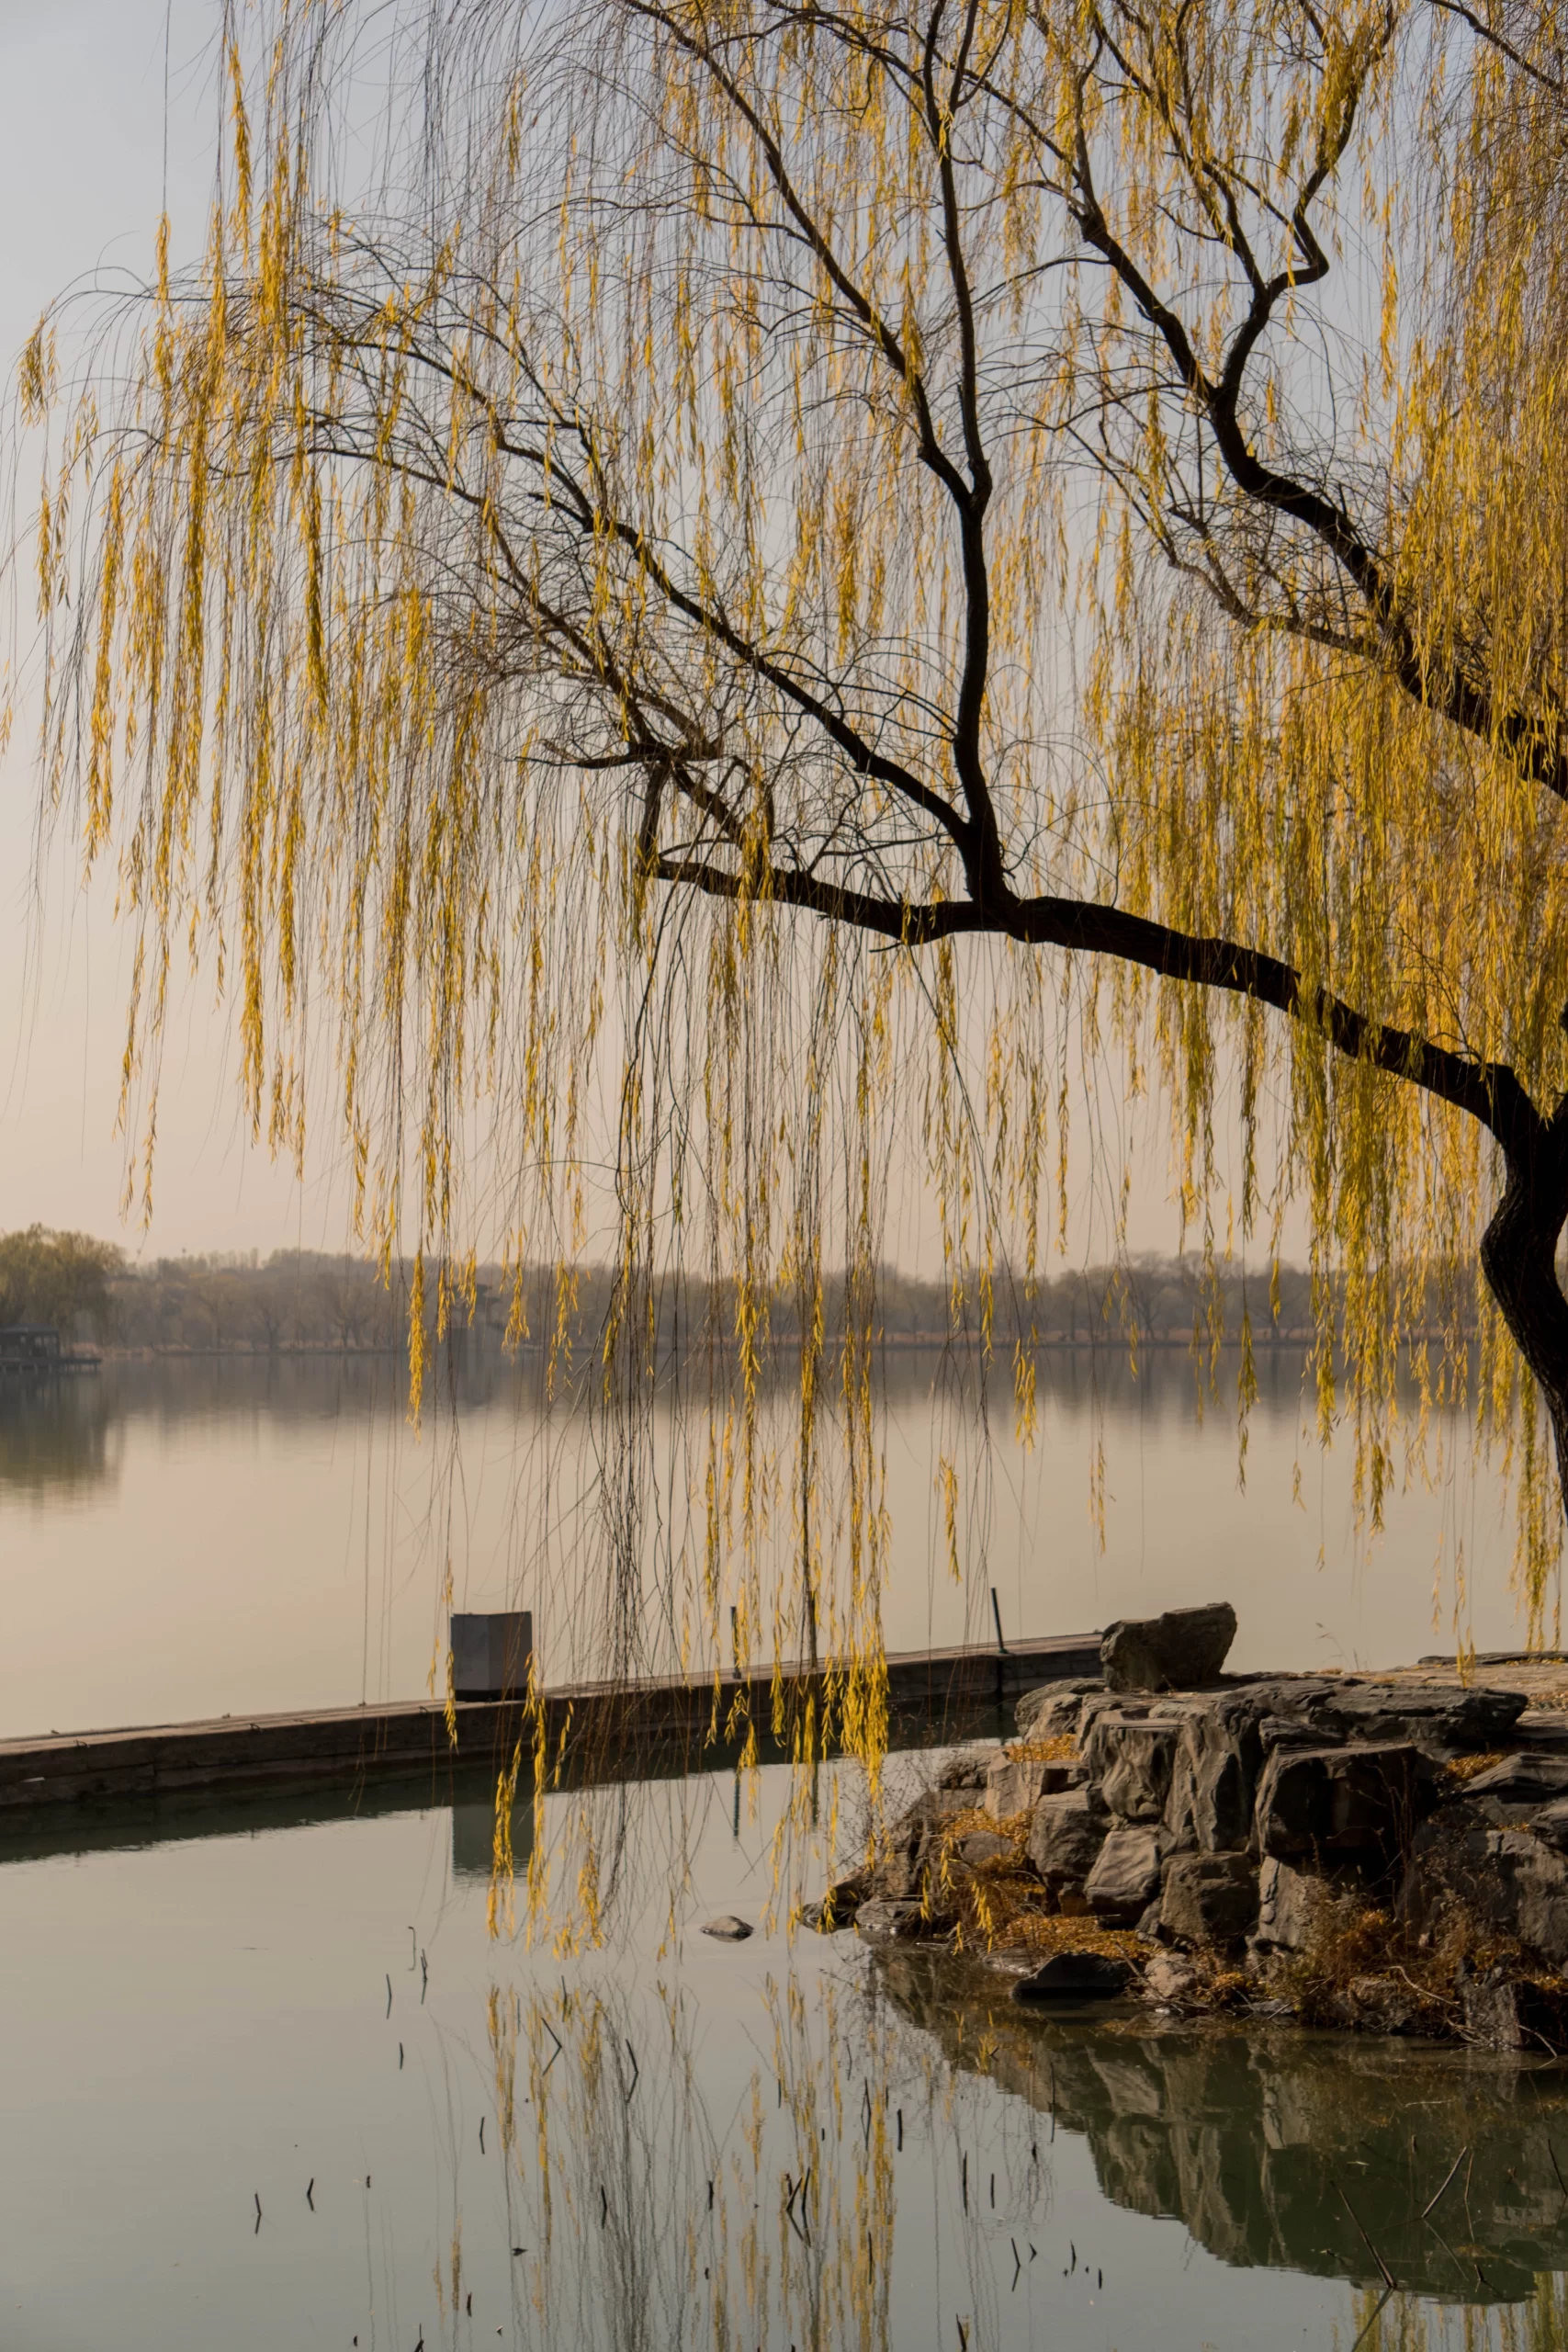 Downloads 5,350 Featured in Spirituality Summer Palace, Beijing, China Published on December 6, 2018 SONY, ILCE-6300 Free to use under the Unsplash License